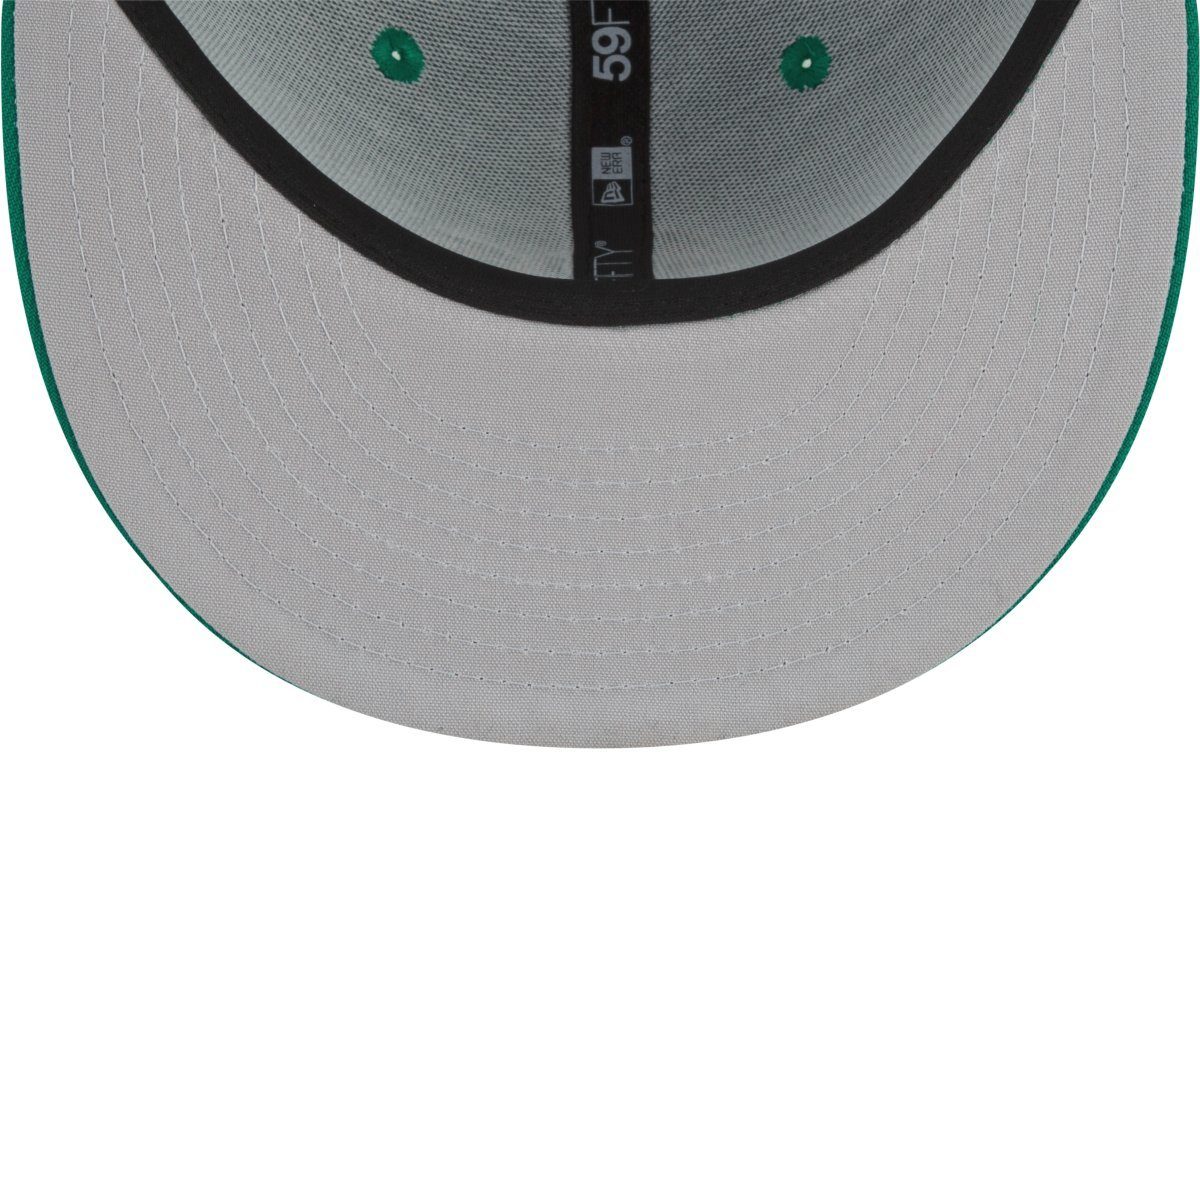 Oakland BATTING 59Fifty Fitted New Cap PRACTICE Era Athletics